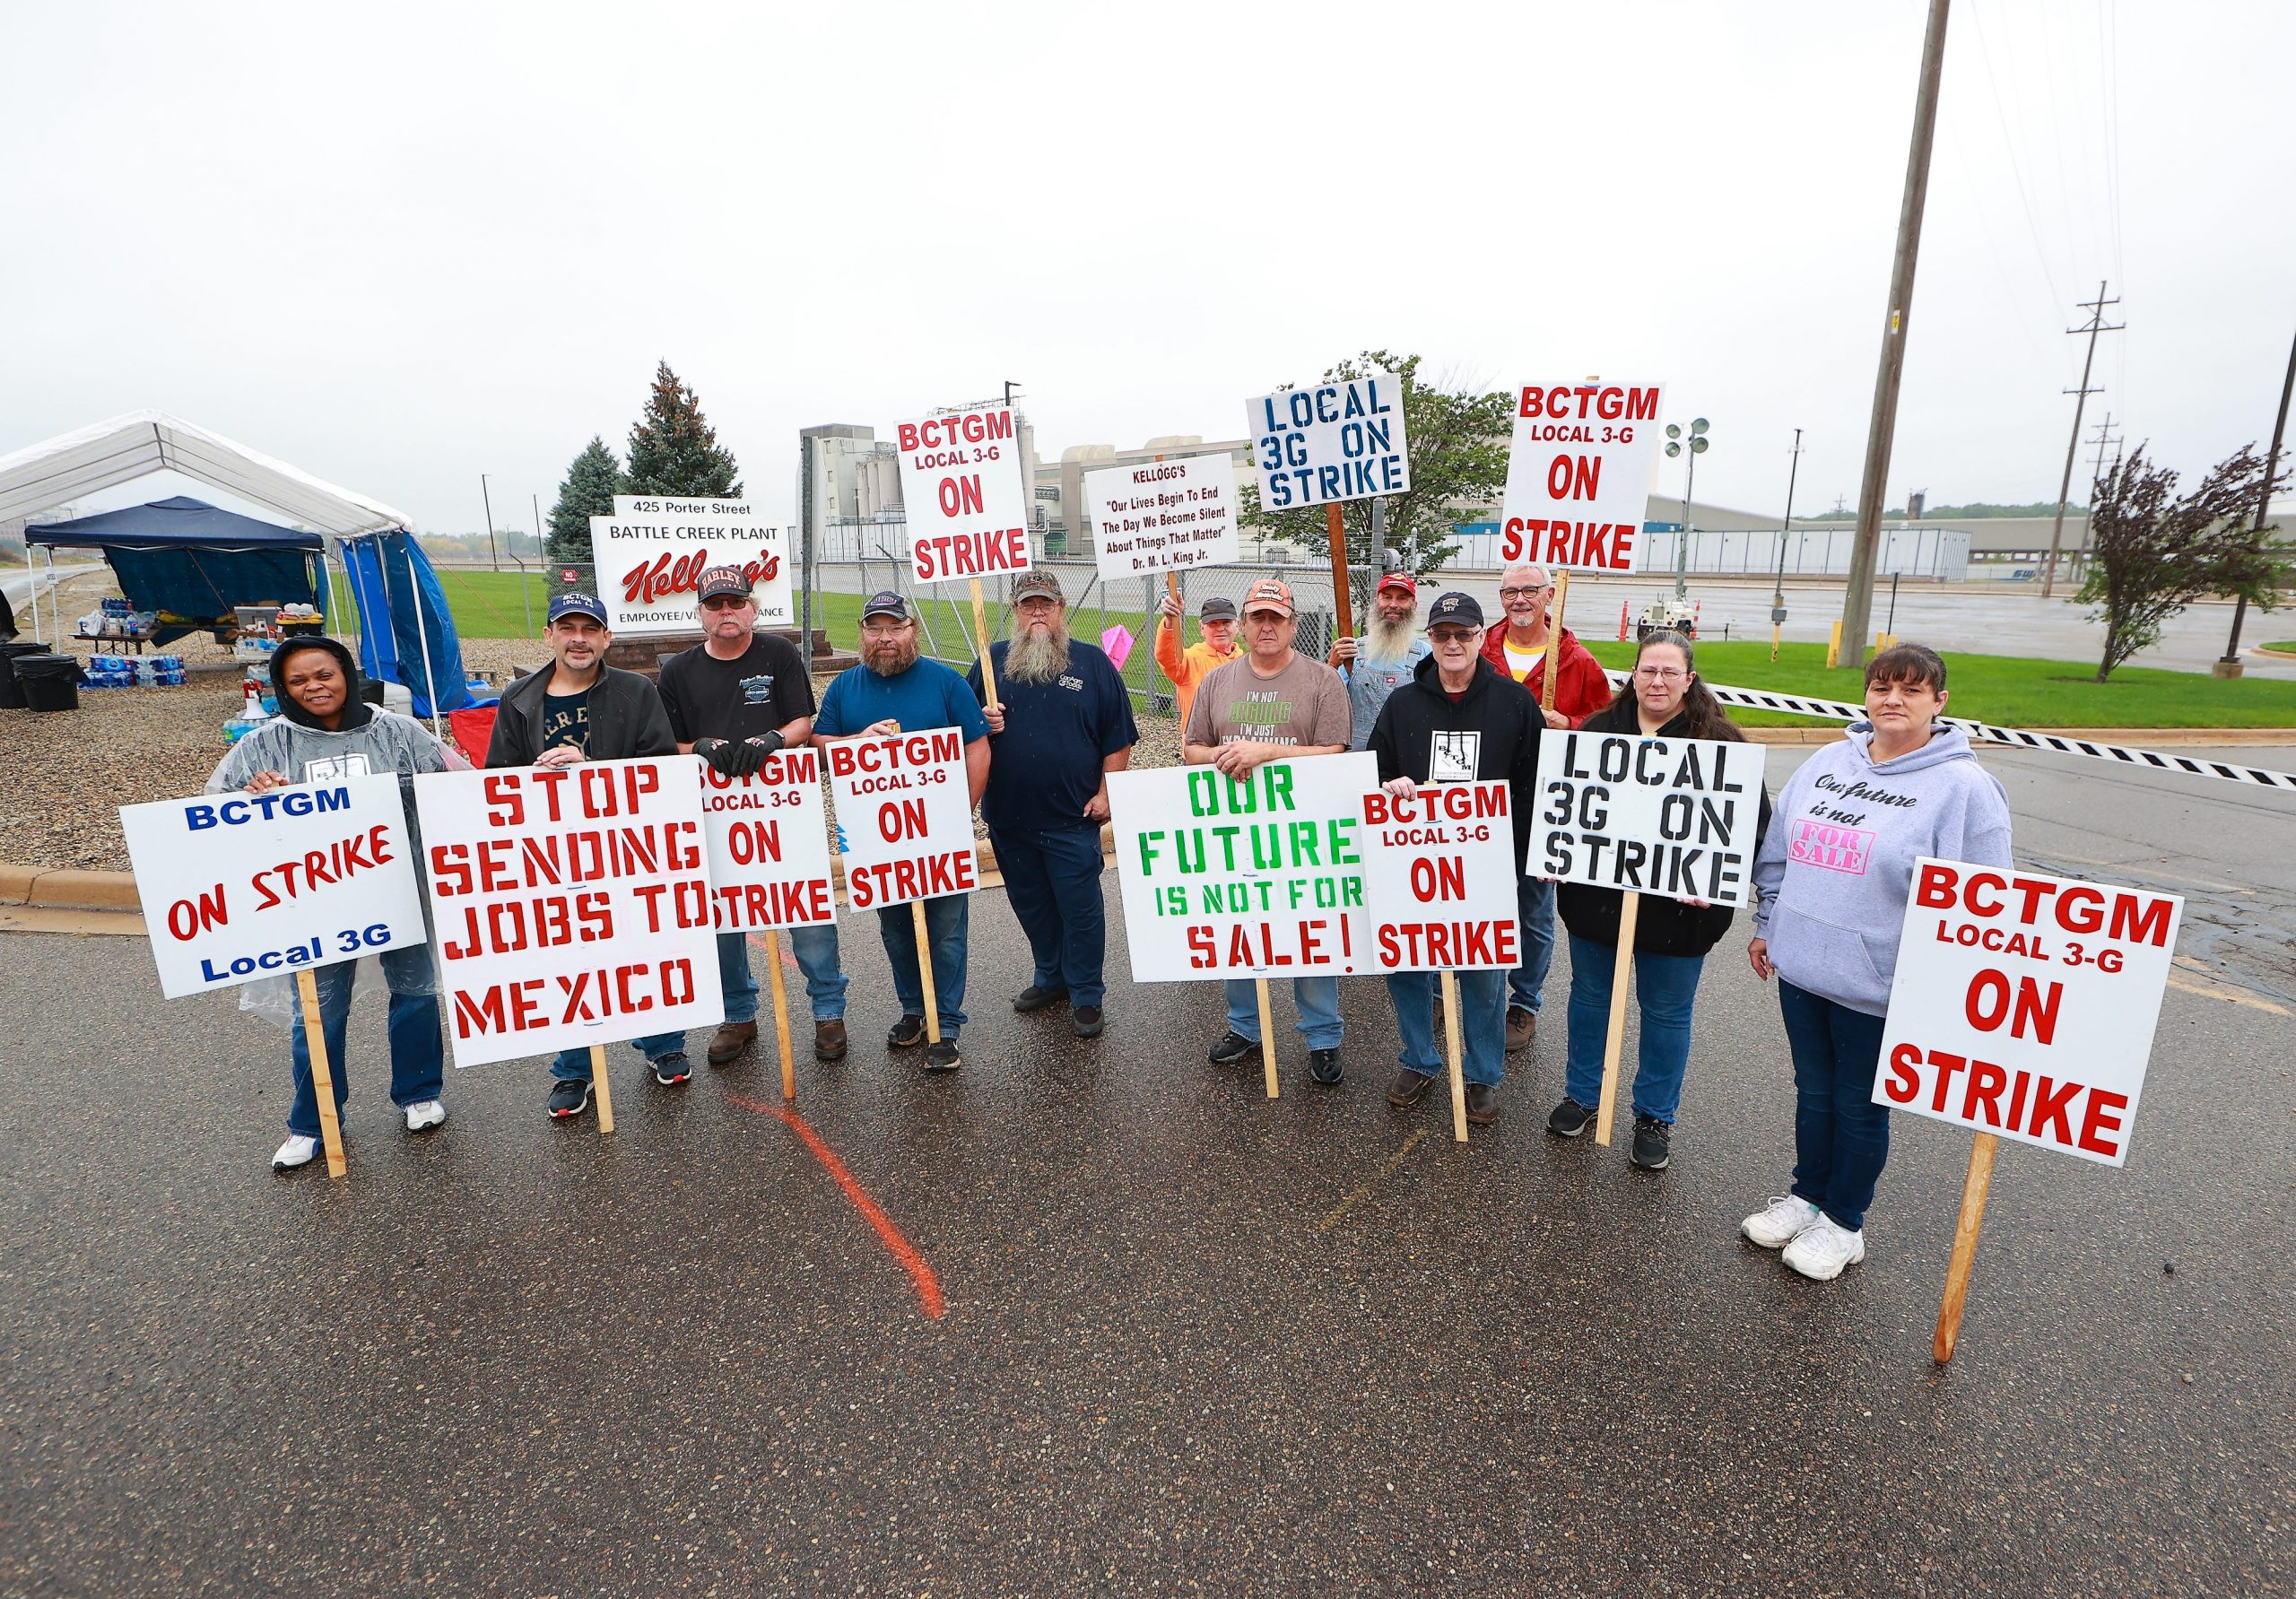 Kellogg's Cereal plant workers demonstrate in front of the plant on October 7, 2021 in Battle Creek, Michigan. Workers at Kellogg’s cereal plants are striking over the loss of premium health care, holiday and vacation pay, and reduced retirement benefits.